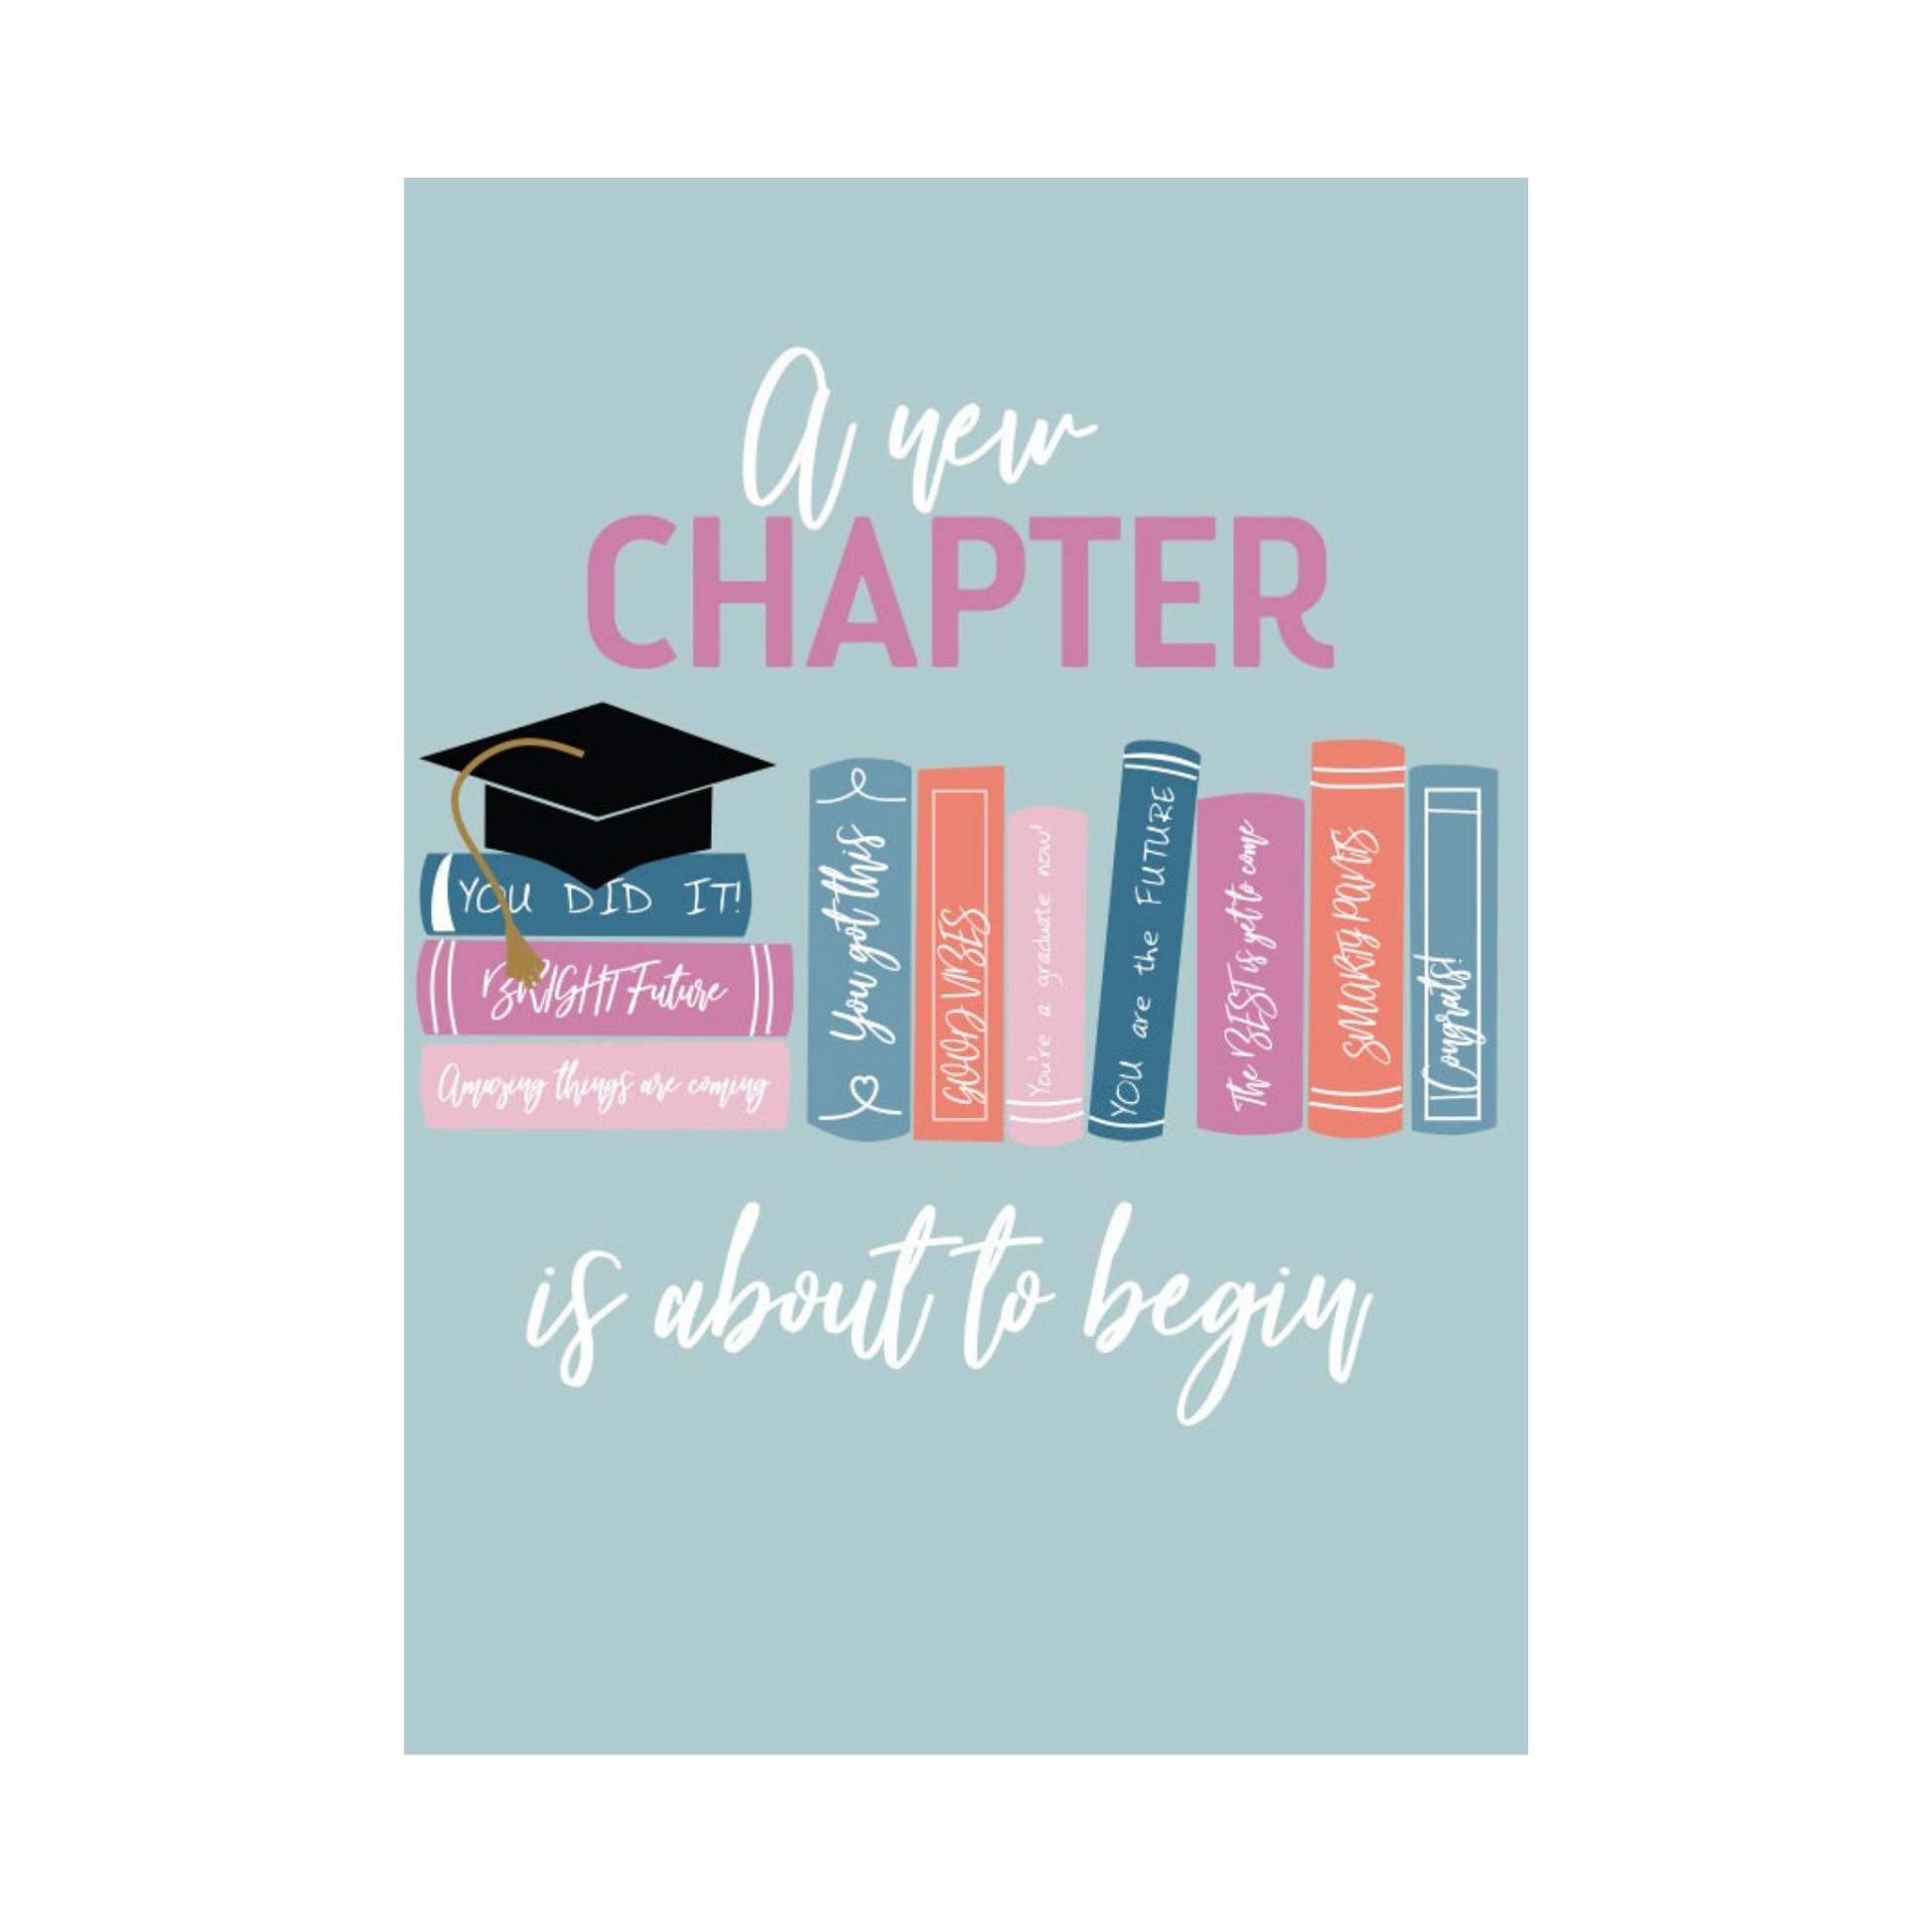 graduation card with book illustrations